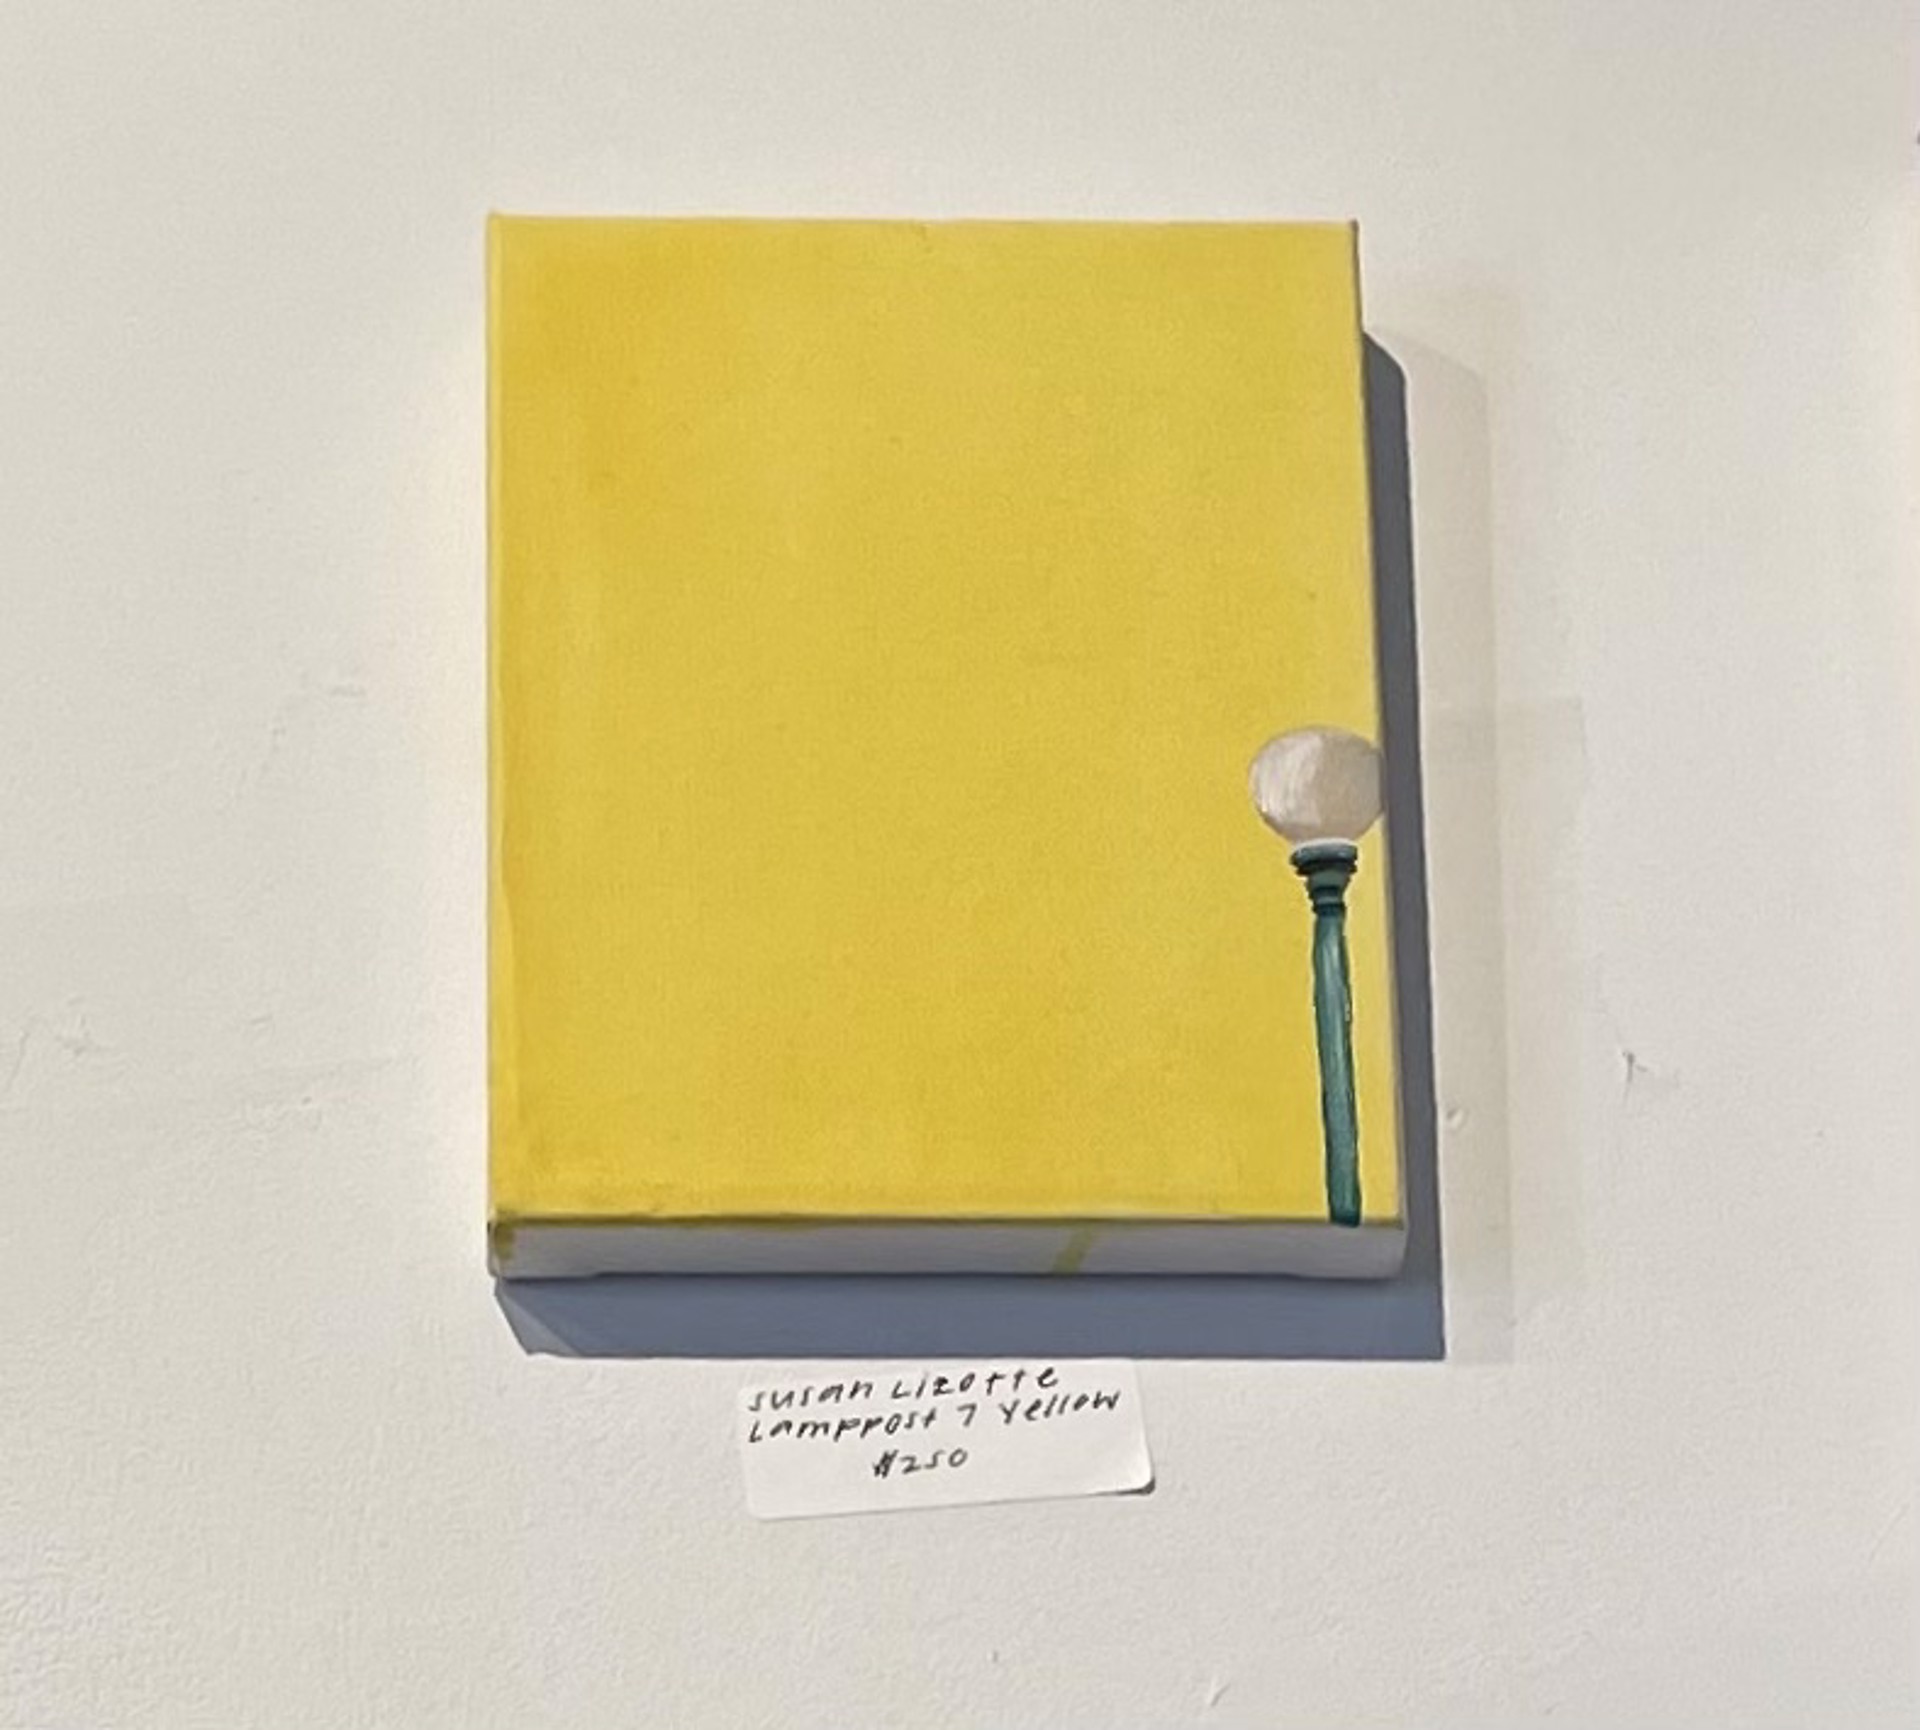 Lampost 7 Yellow by Susan Lizotte